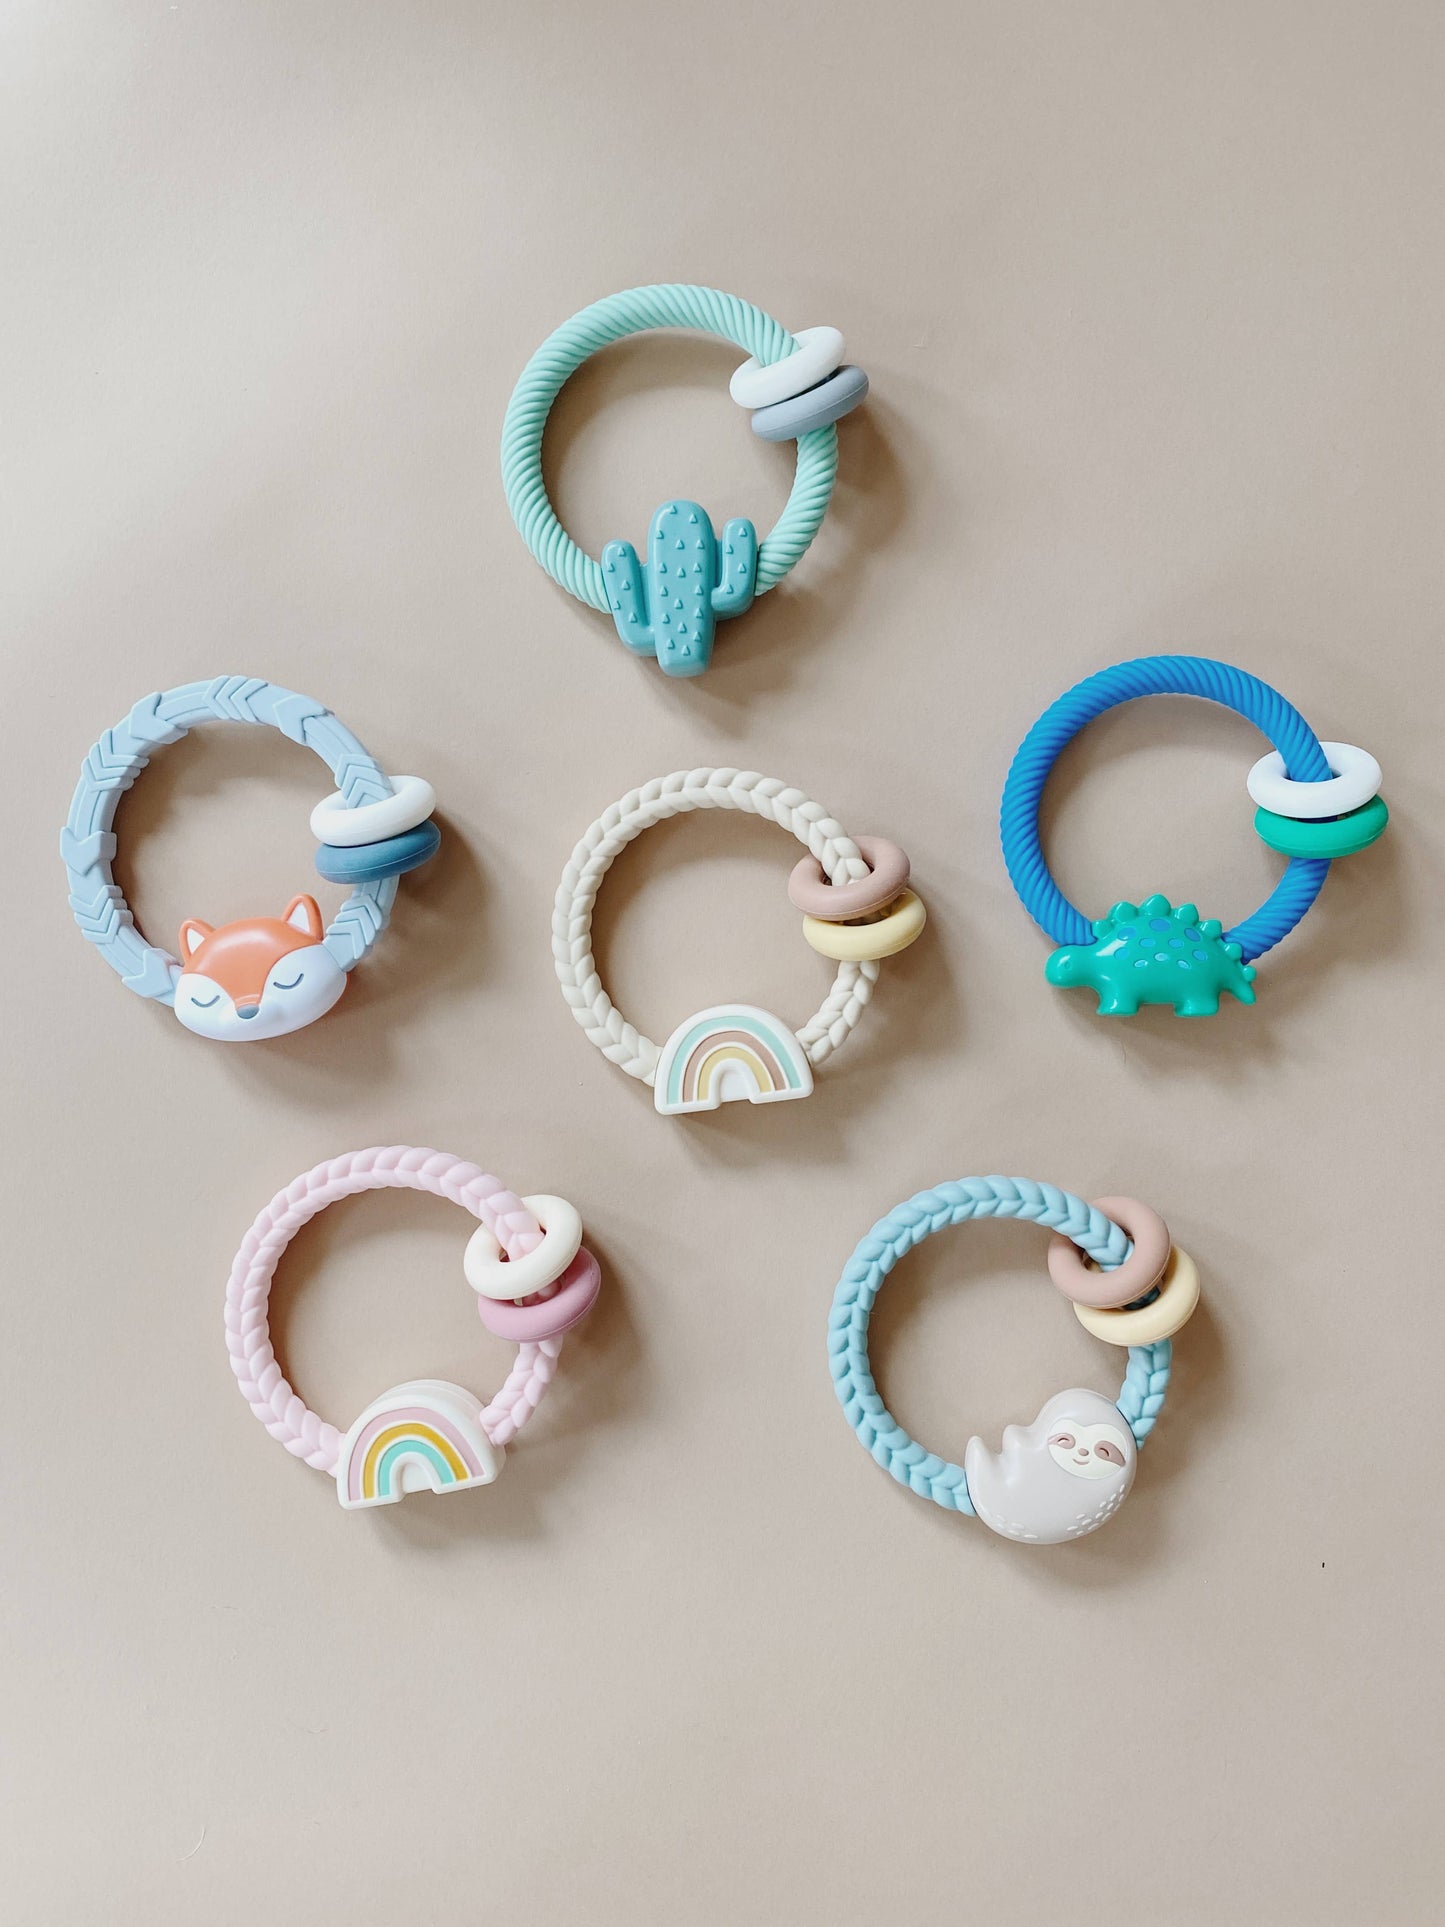 Itzy Ritzy - Ritzy Rattle™ Silicone Teether Rattles: Rainbow